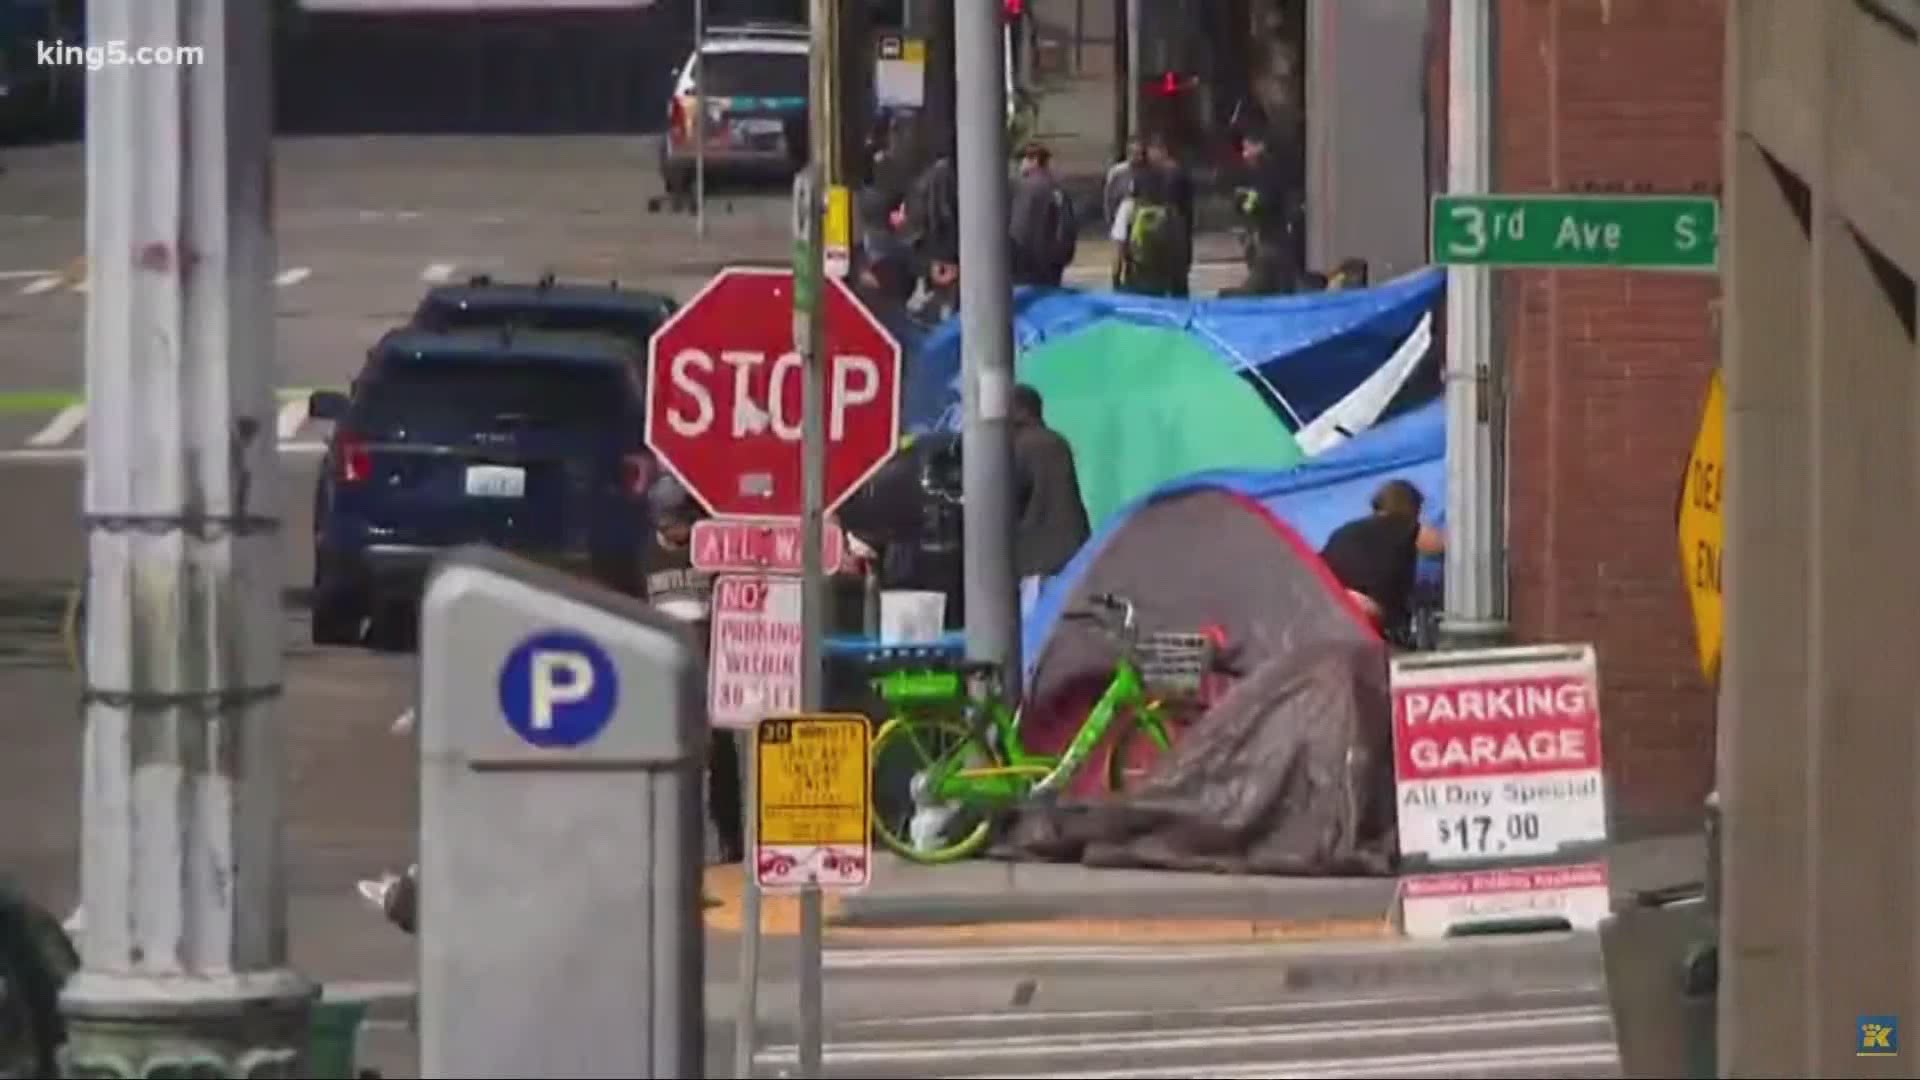 The Puget Sound metro area's homeless population rose since 2019, and disparities persist across racial and ethnic lines, according to the annual one-night count.